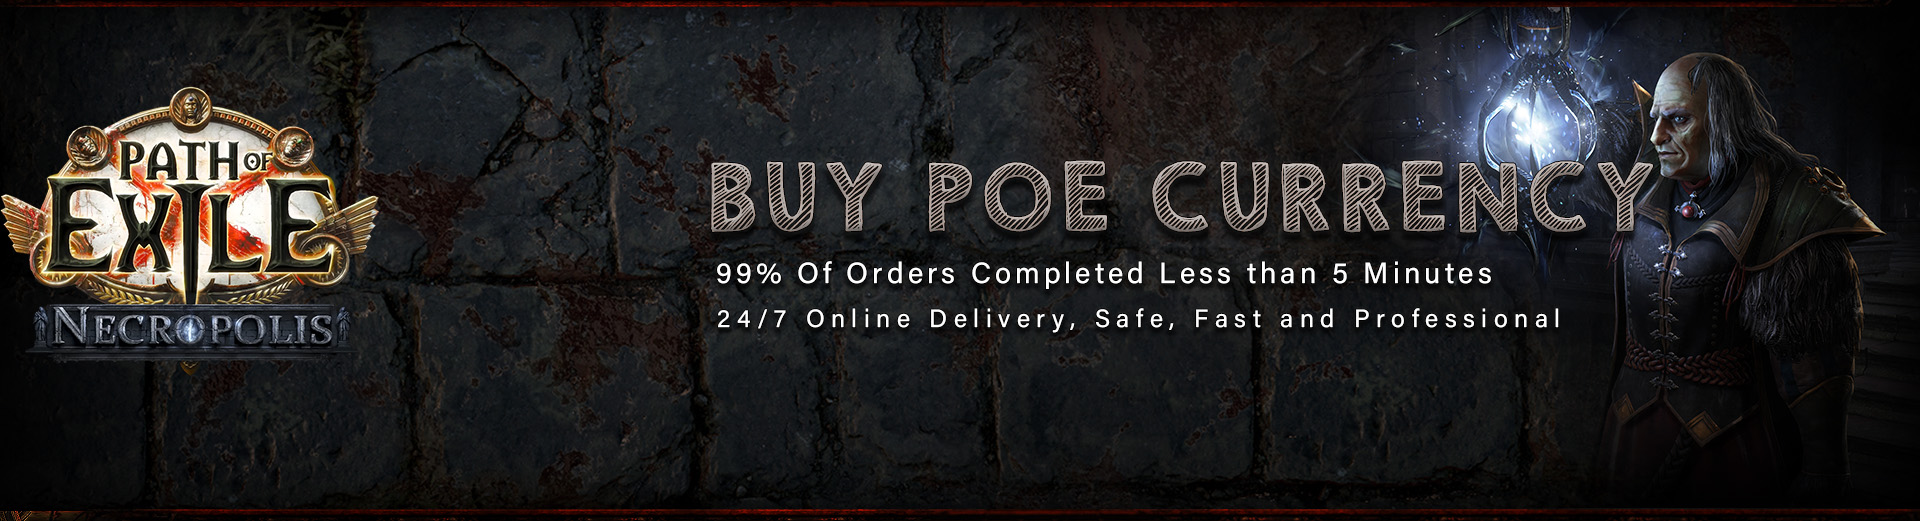 Buy Path of Exile Currency in latest League